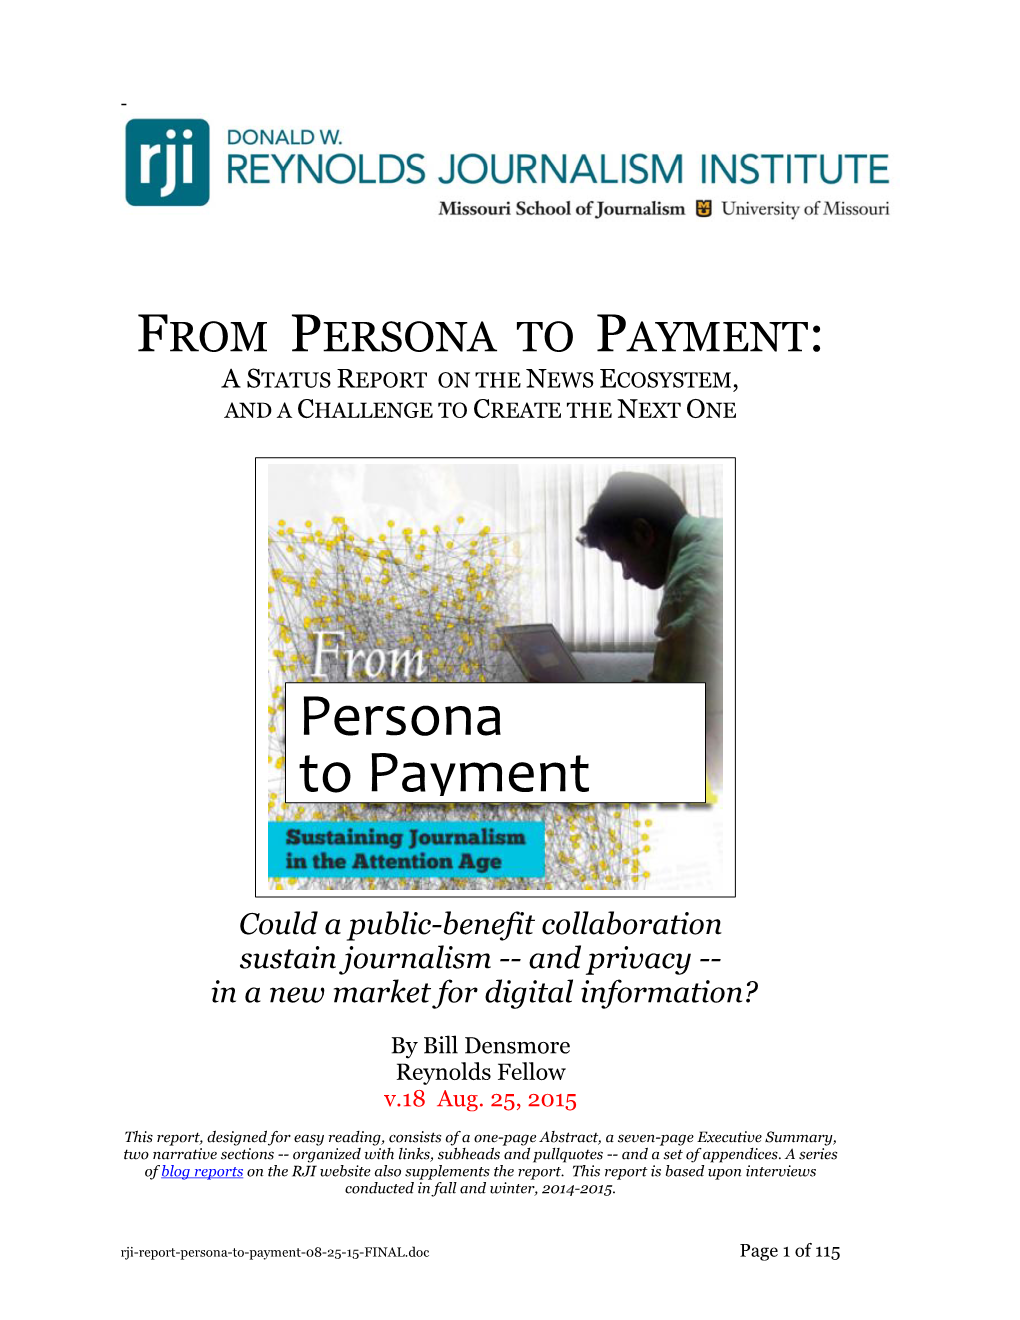 Persona to Payment: a Status Report on the News Ecosystem, and a Challenge to Create the Next One